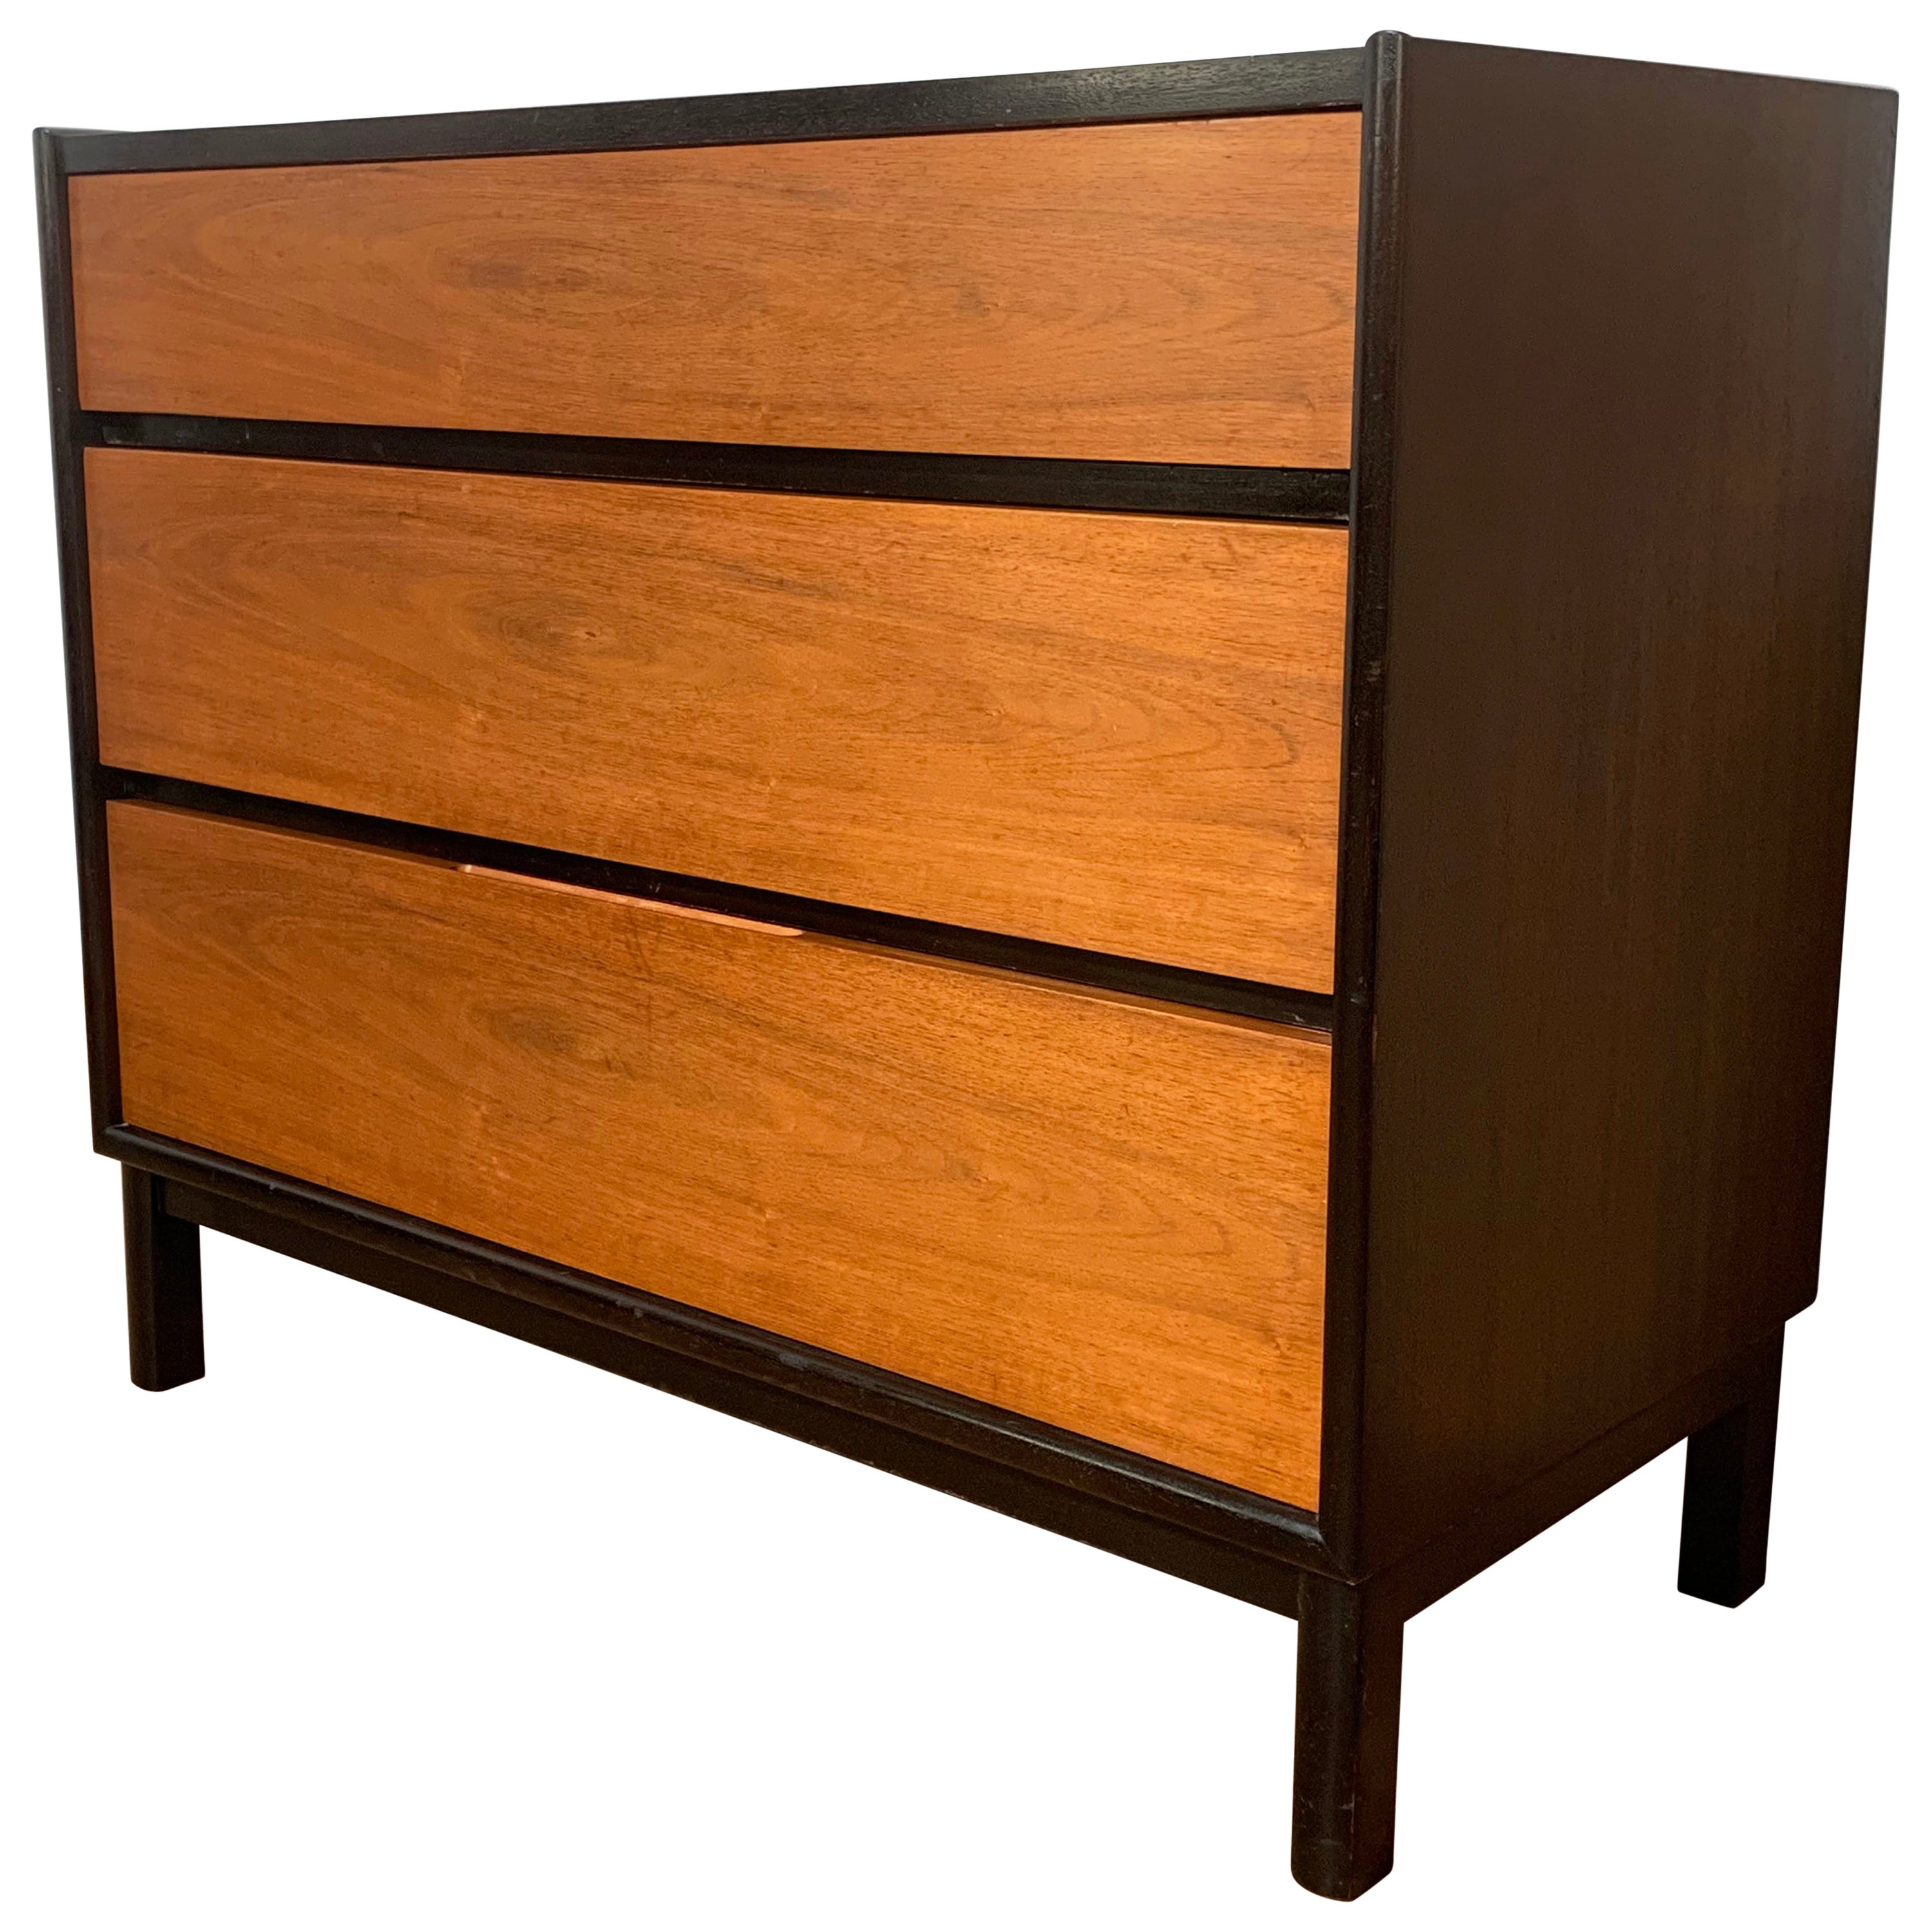 Edward Wormley for Dunbar Two Tone Dresser in Mahogany and Rosewood Circa 1960s For Sale